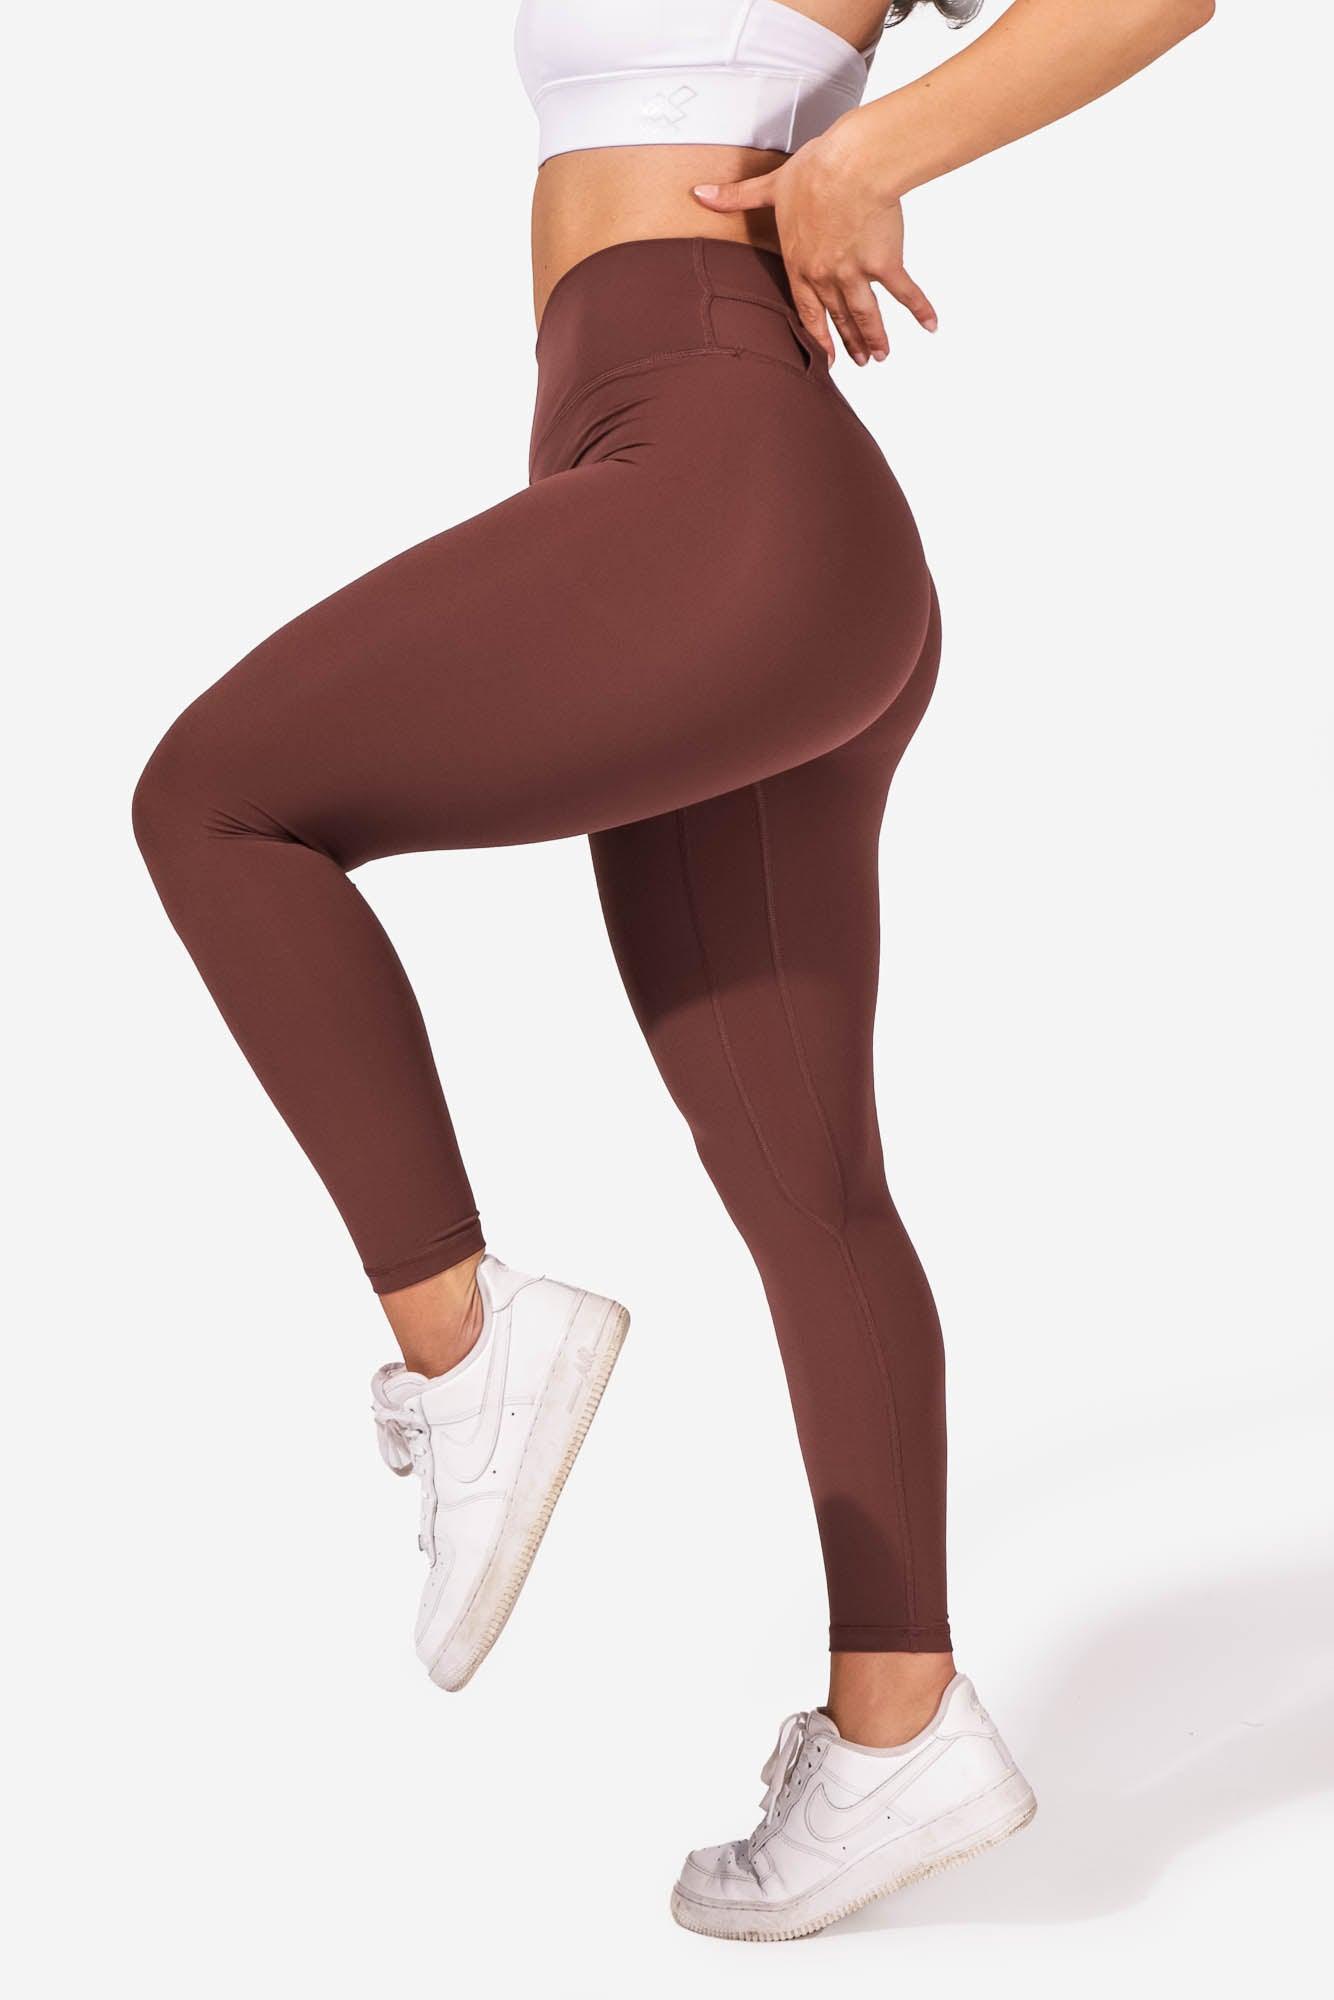 THREE-QUARTER LEGGINGS With Multiple Layered Hem and Beads Brown